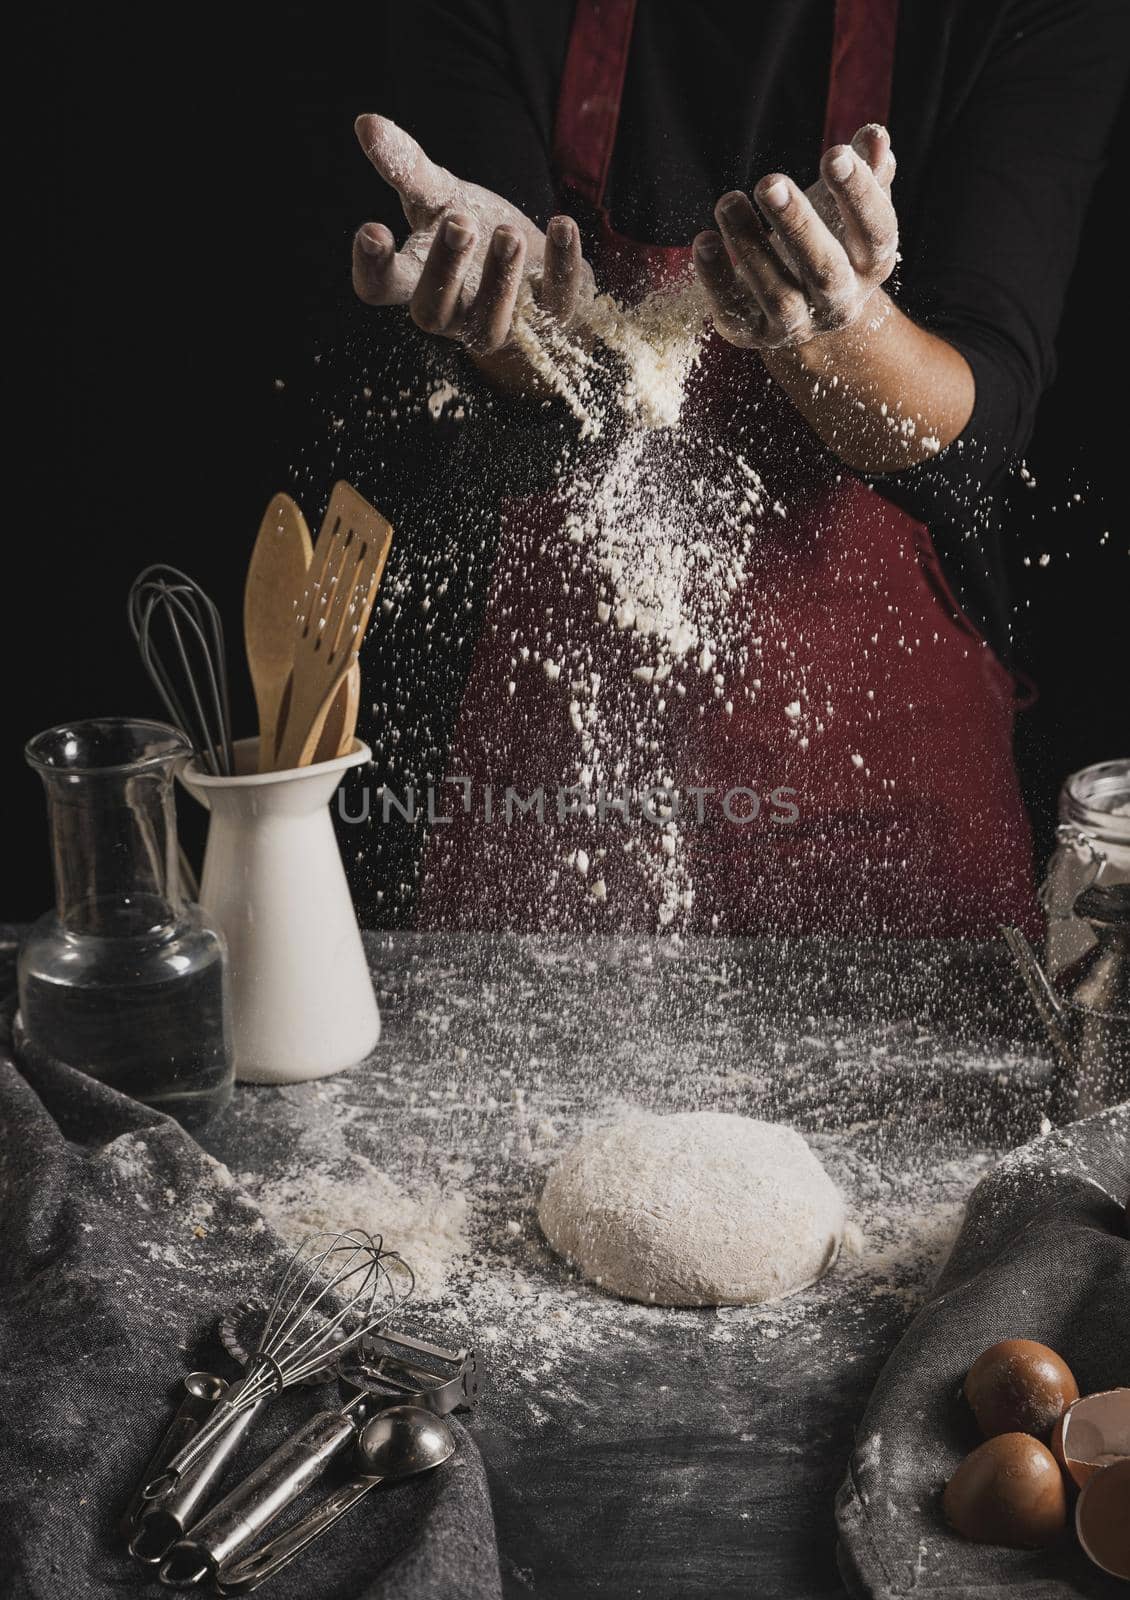 front view baker hands spreading flour. High quality beautiful photo concept by Zahard